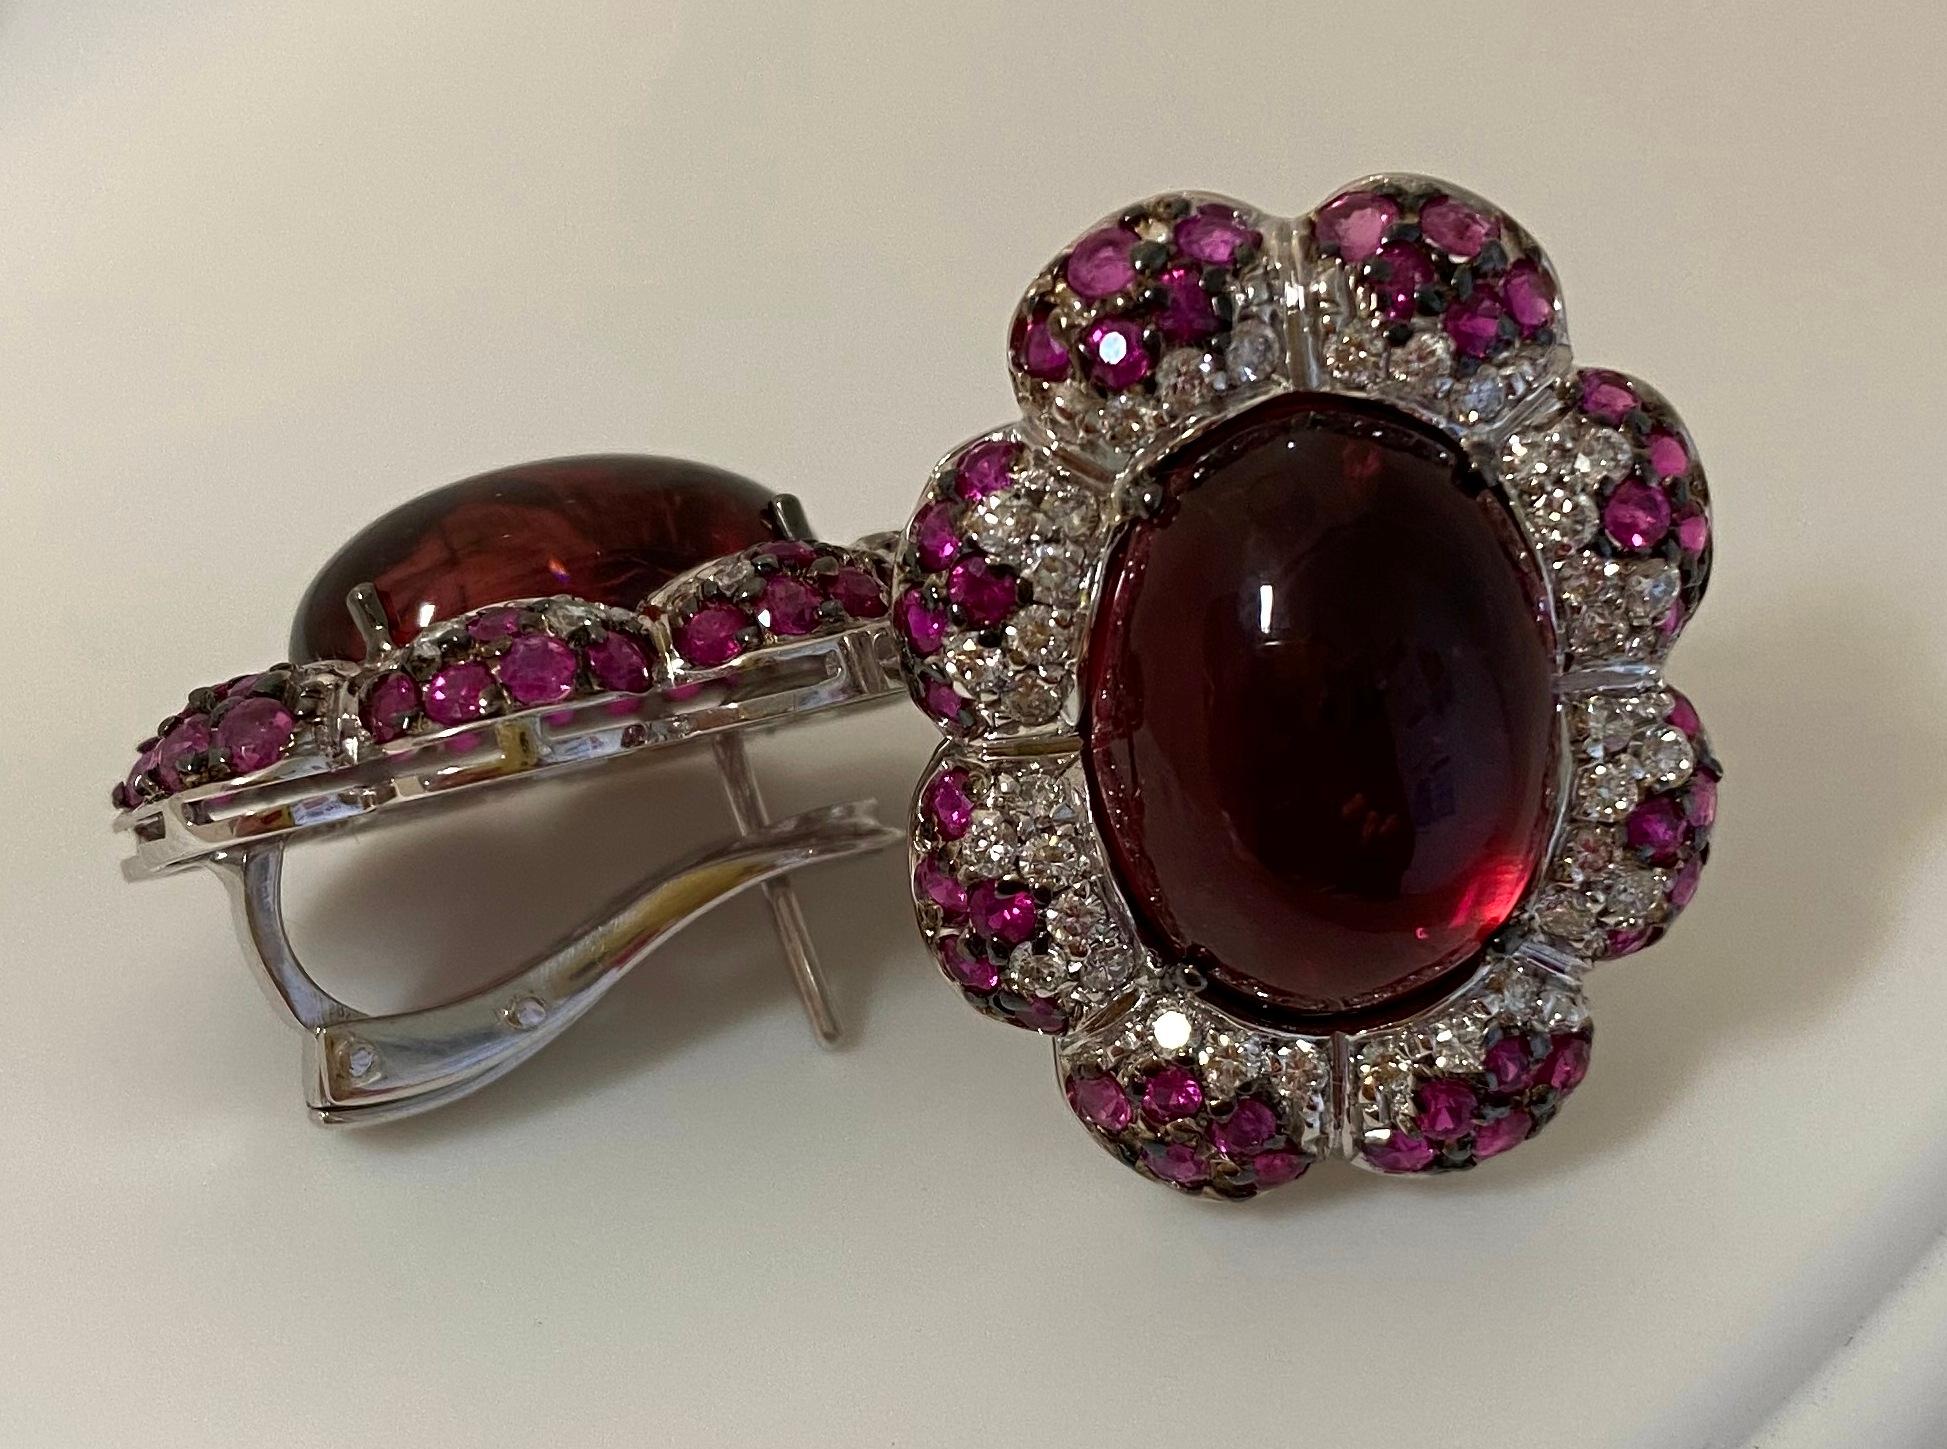 18 Karat White Gold Diamond Tourmaline and Ruby Earrings

72 Diamonds 1,07 Carat
2  Tourmaline 20,60 Carat
88 Ruby 4,14 Carat




Founded in 1974, Gianni Lazzaro is a family-owned jewelery company based out of Düsseldorf, Germany.
Although rooted in